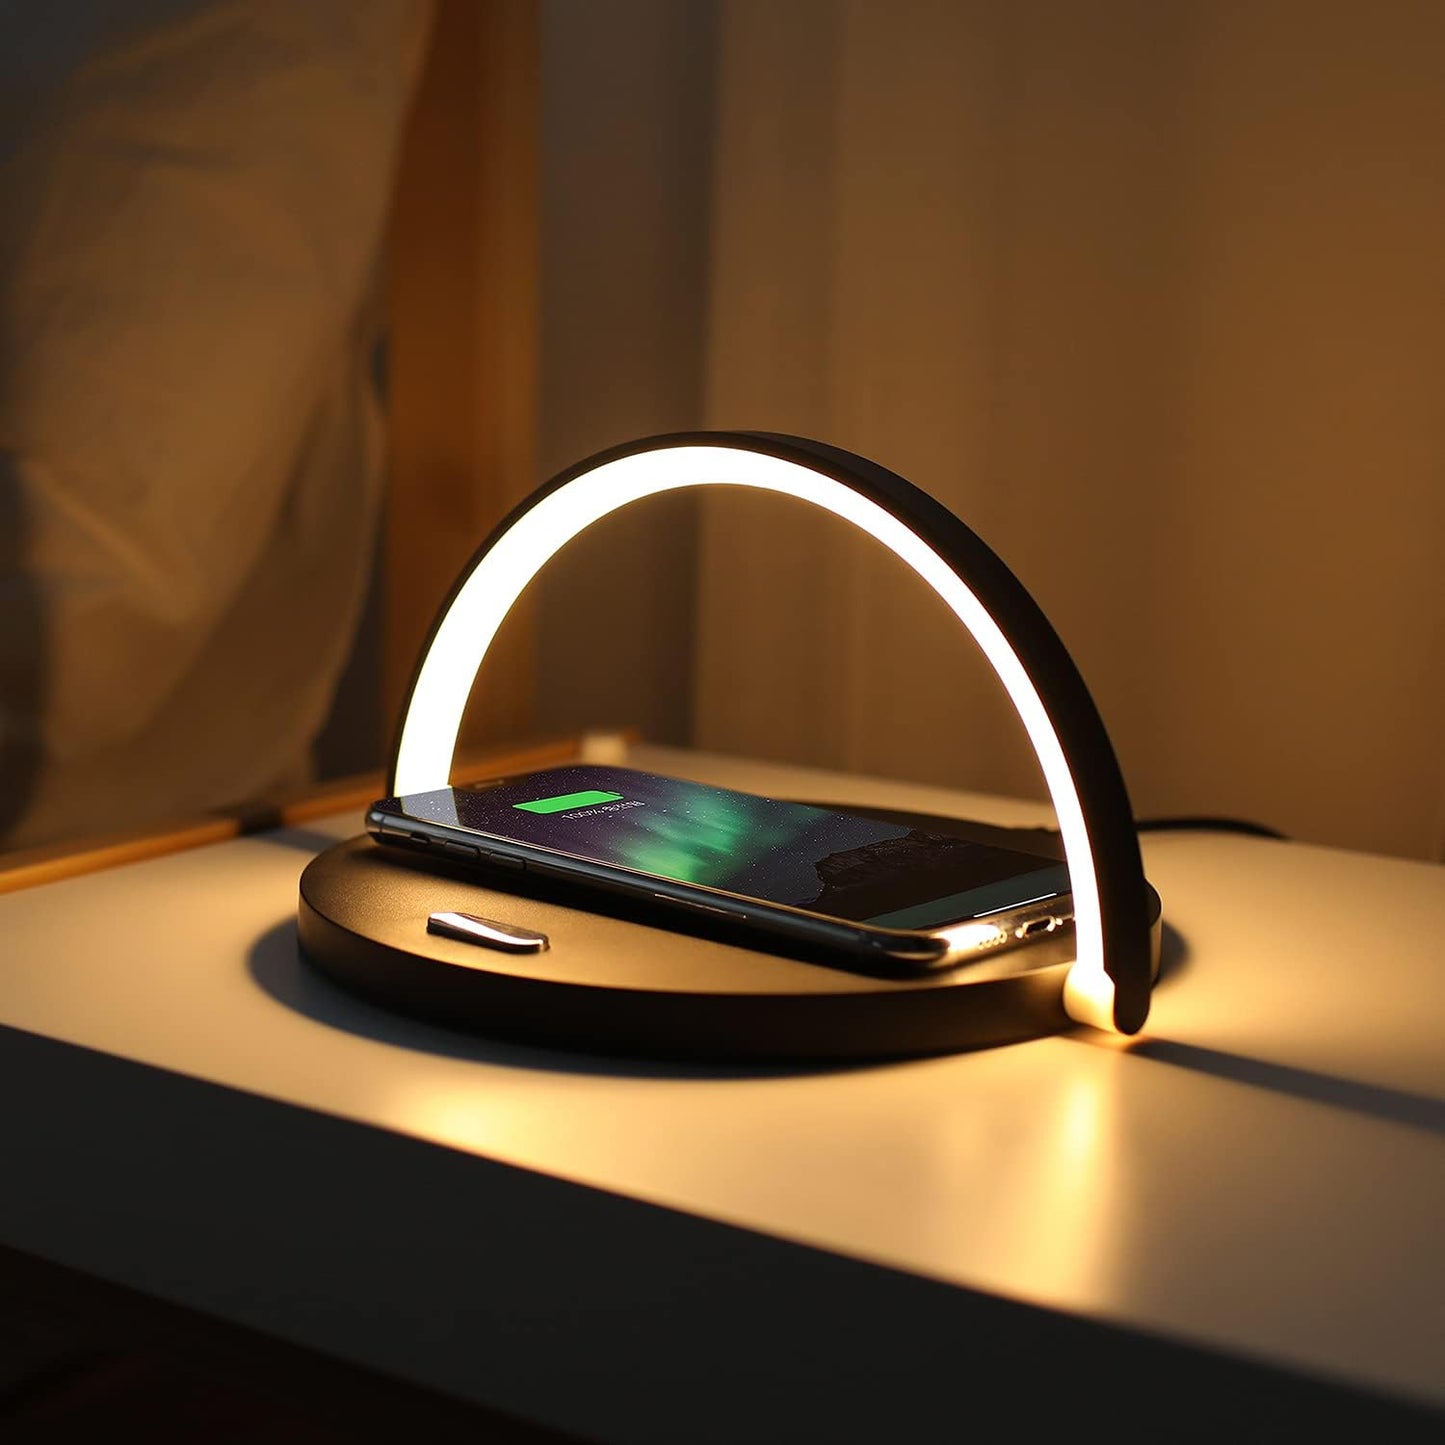 Superbe Modern Simple Wireless Charging Nightlight (Wood), Max.15W Fast Wireless Charger, Touch Control, 3-Level Brightness, for Galaxy S10/S20/Note 10, iPhone X/11/11 Pro, Airpods 2, LG V50/G7/G8